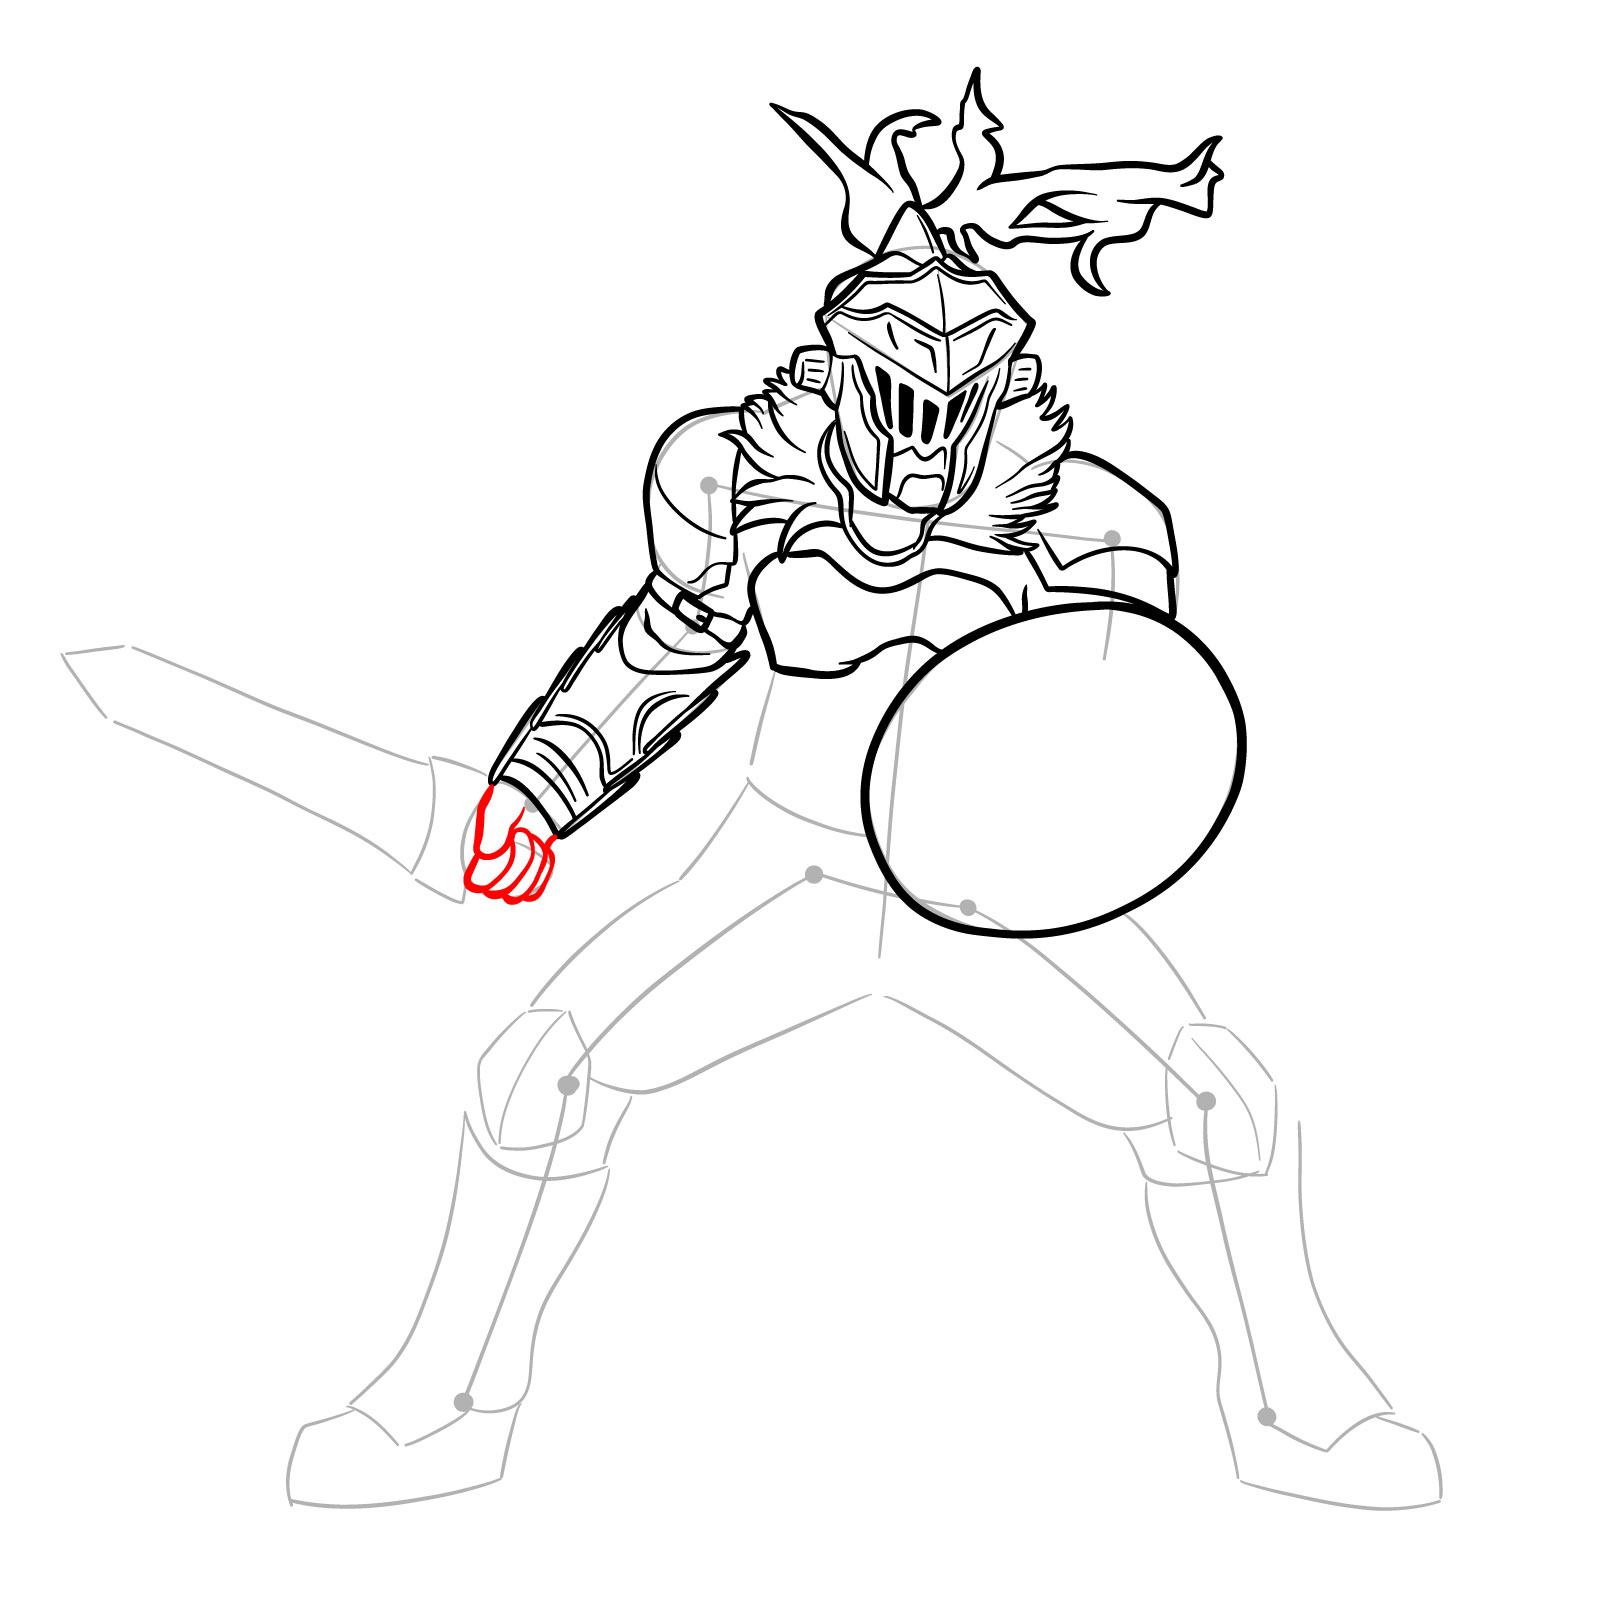 How to Draw Goblin Slayer in battle stance - step 21